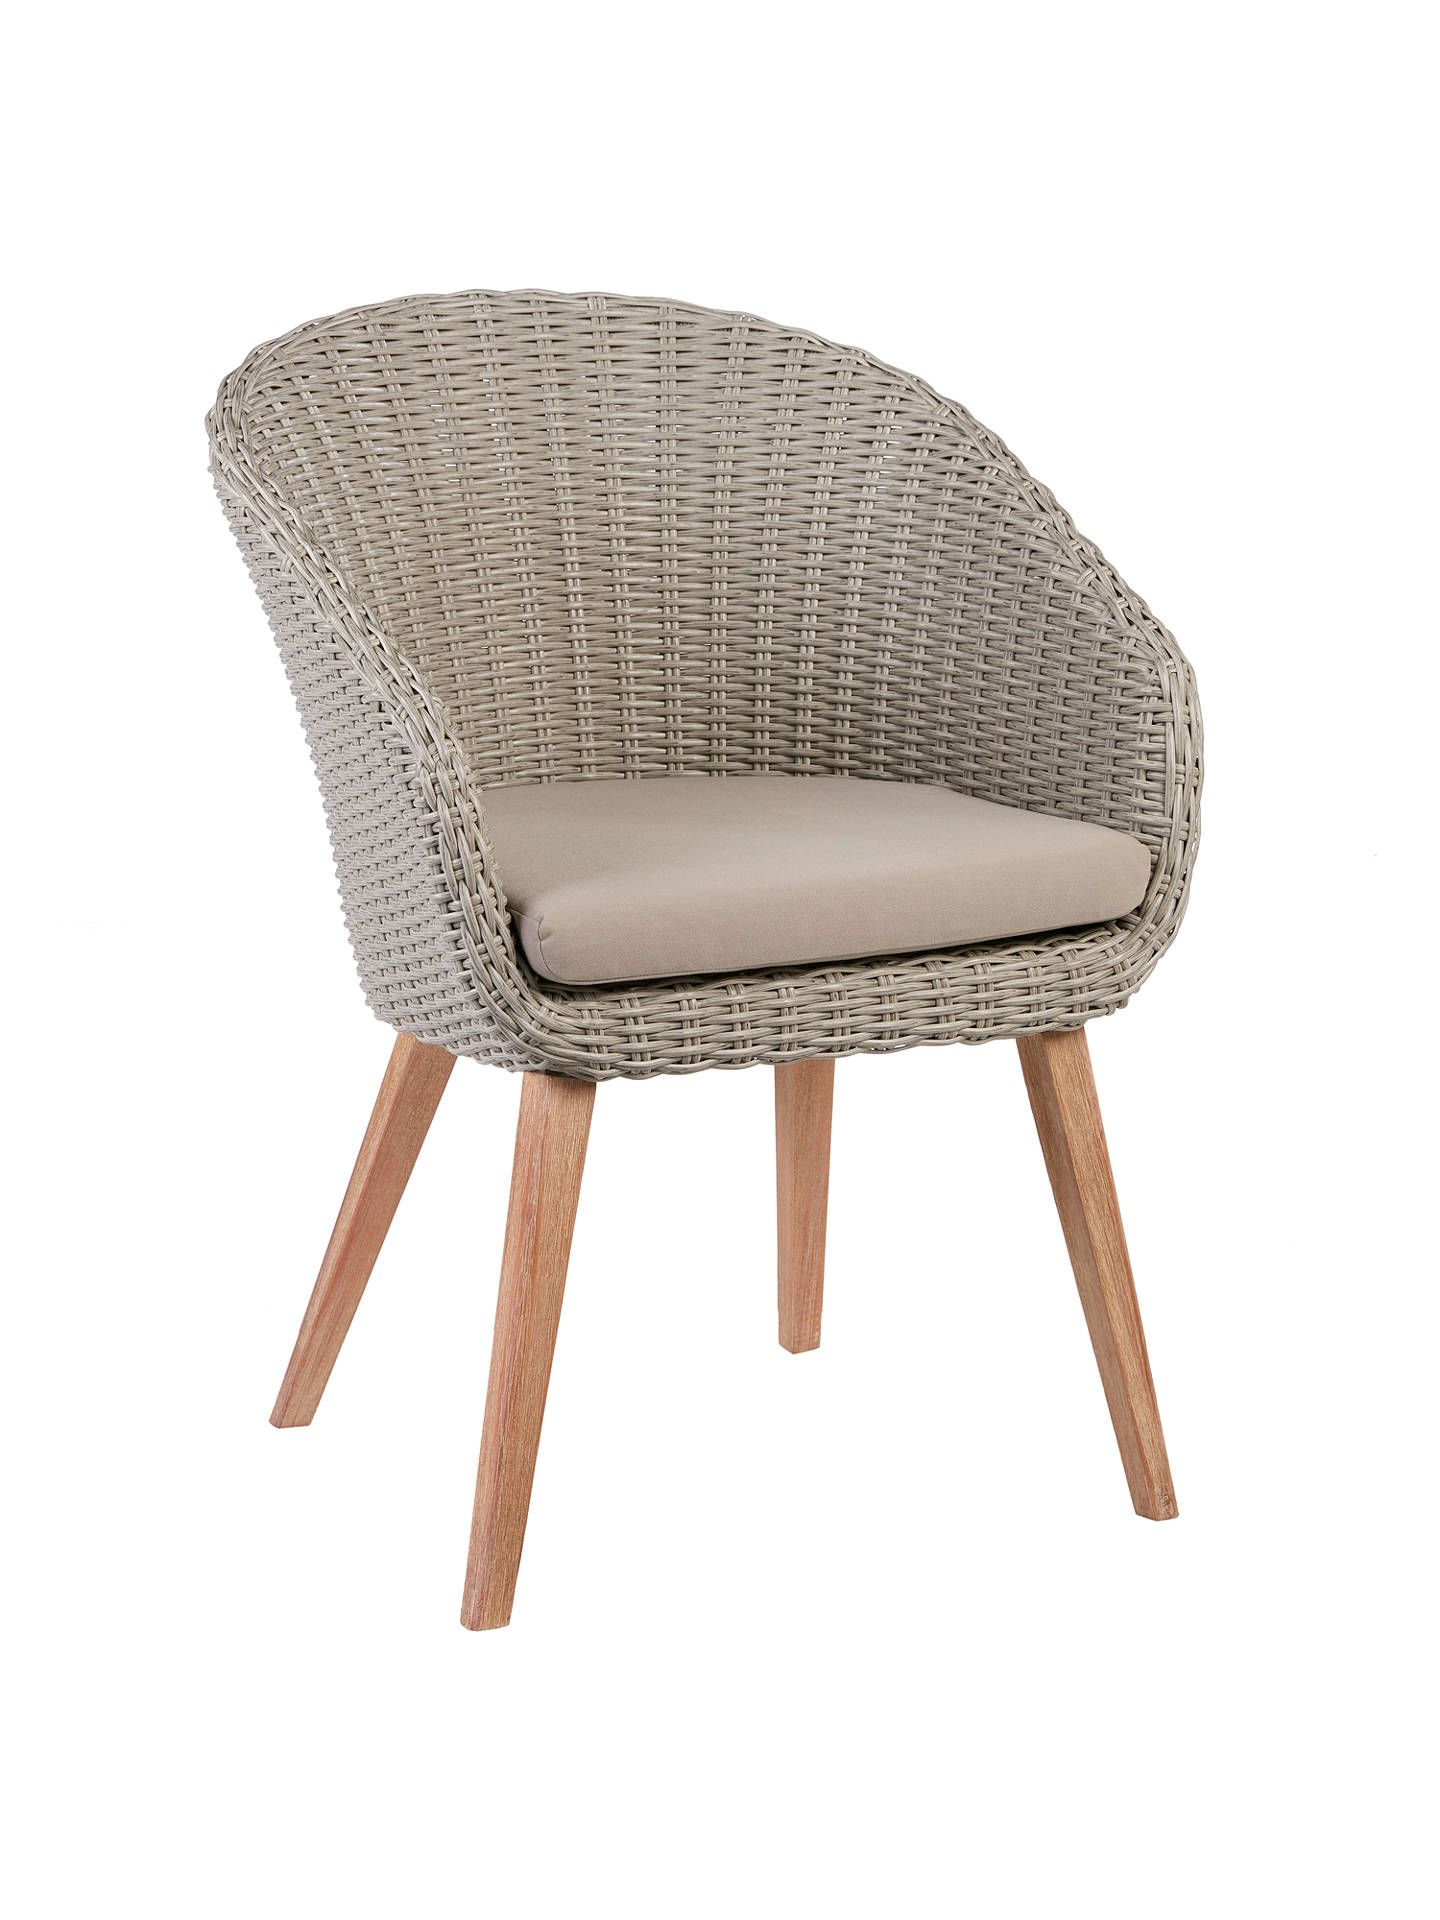 V Brand New To John Lewis Sol Four Seater Round Garden Table & Chairs ISP £999 (John Lewis) Stock - Image 6 of 6